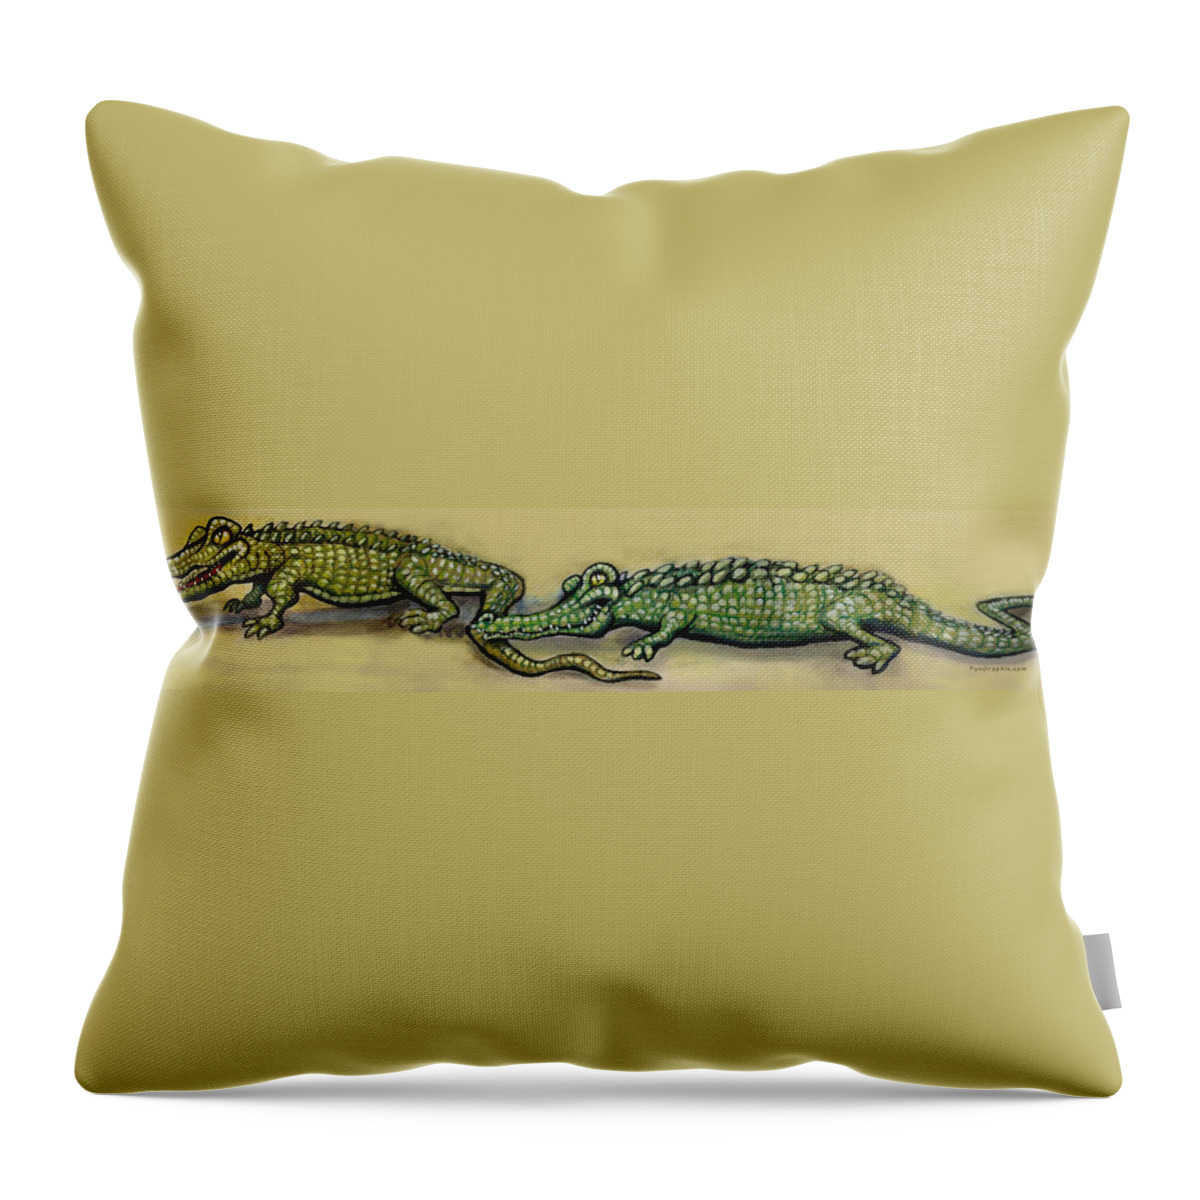 Crocodile Throw Pillow featuring the painting Crocodiles by Kevin Middleton